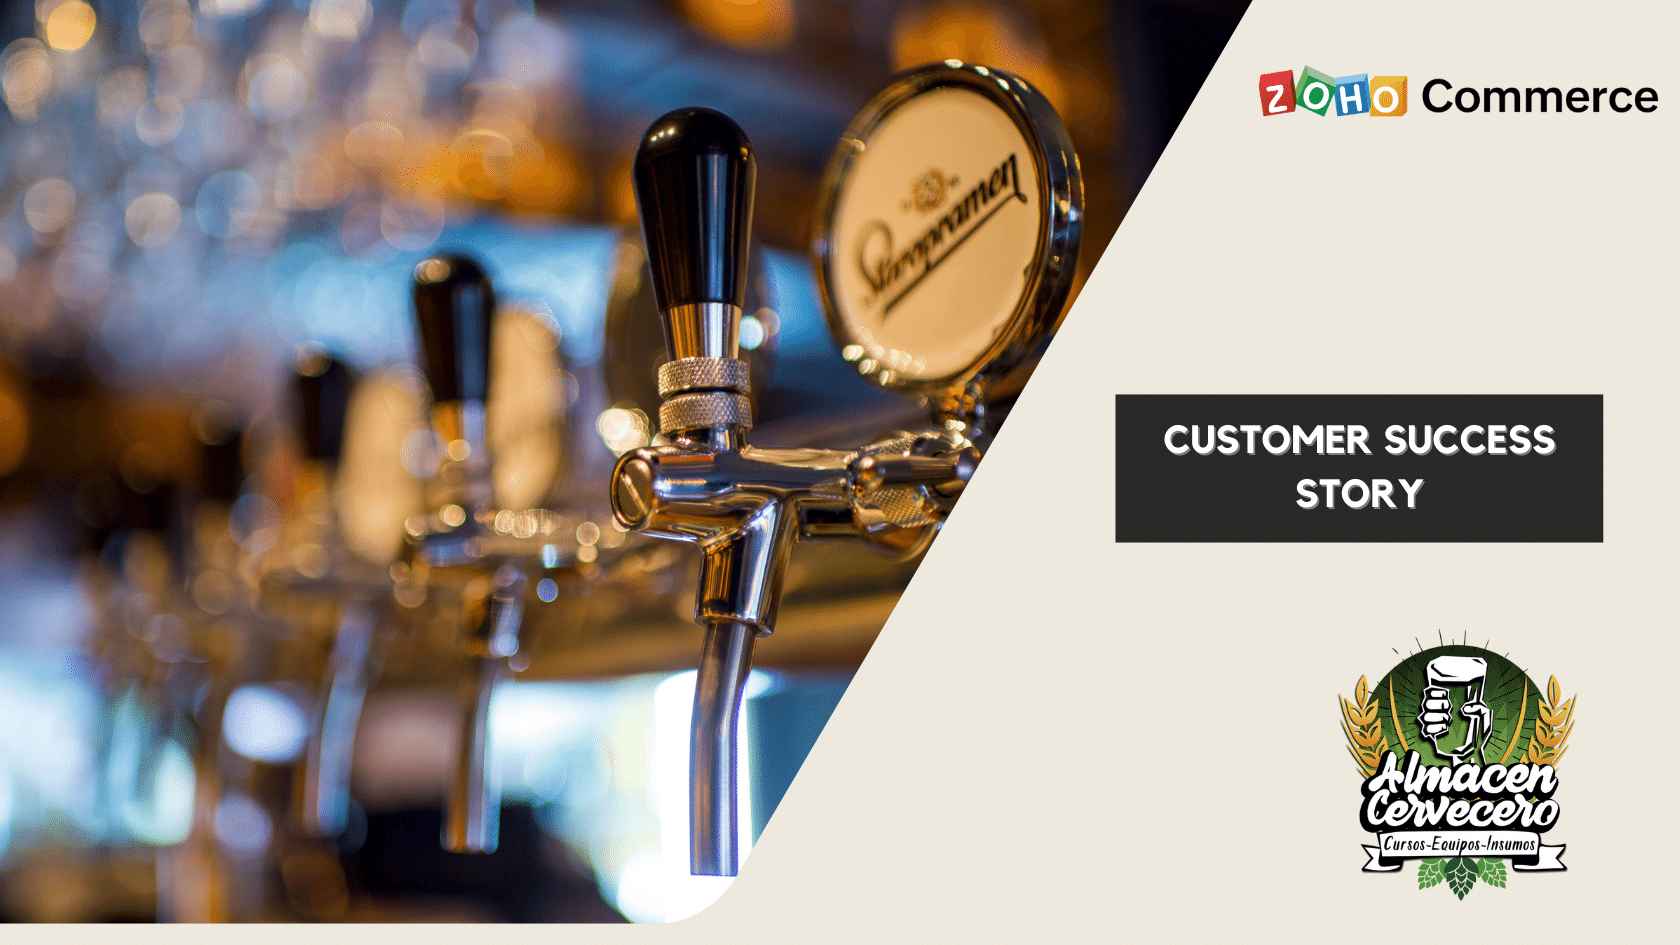 How Almacen Cervecero opened new business possibilities with Zoho Commerce